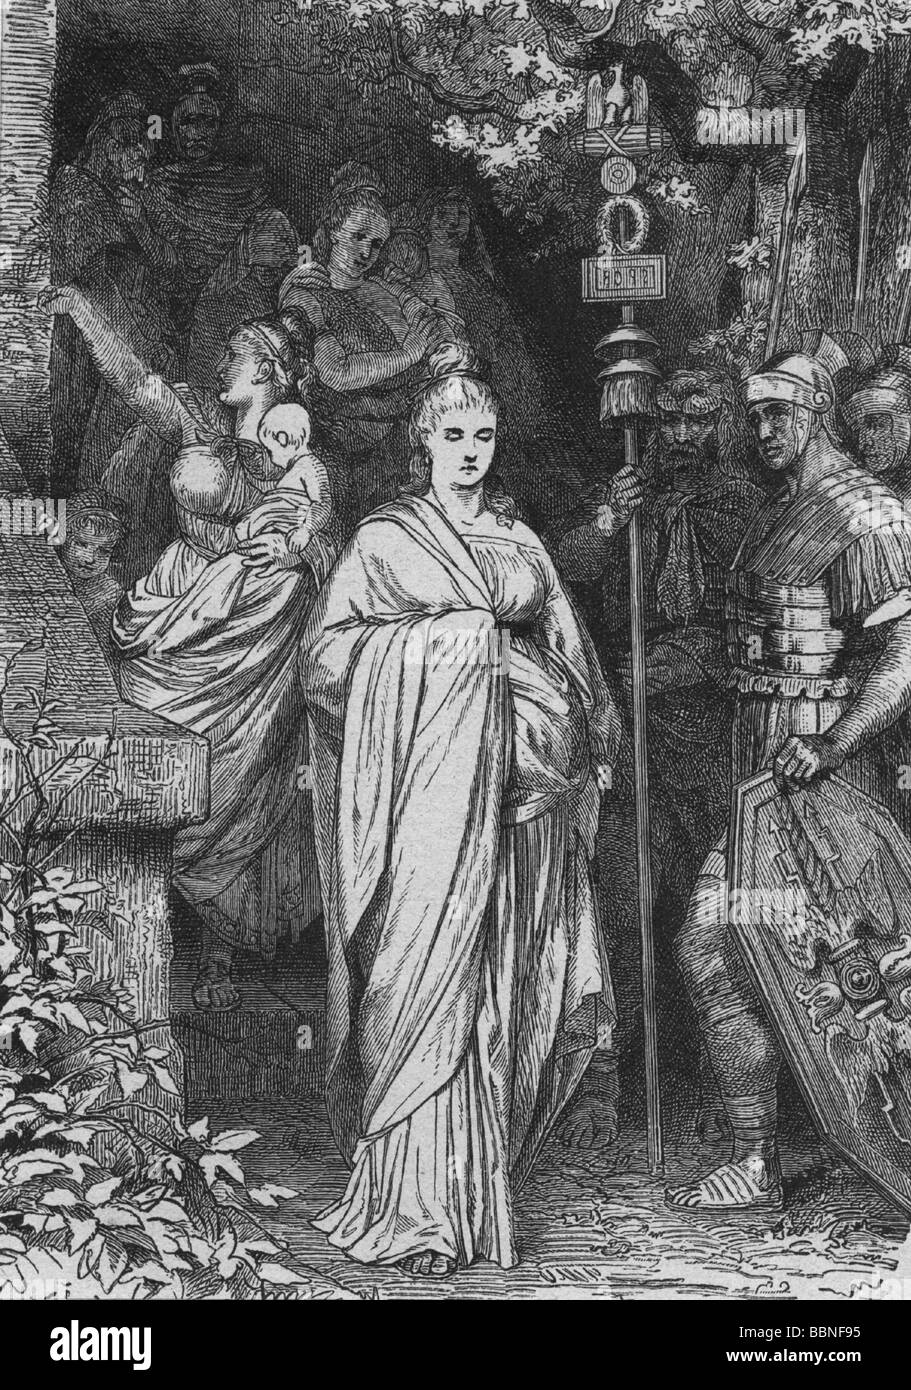 Thusnelda, circa 10 BC - 17 AD, wife of Arminius, captured by the Romans, wood engraving, 19th century, , Stock Photo